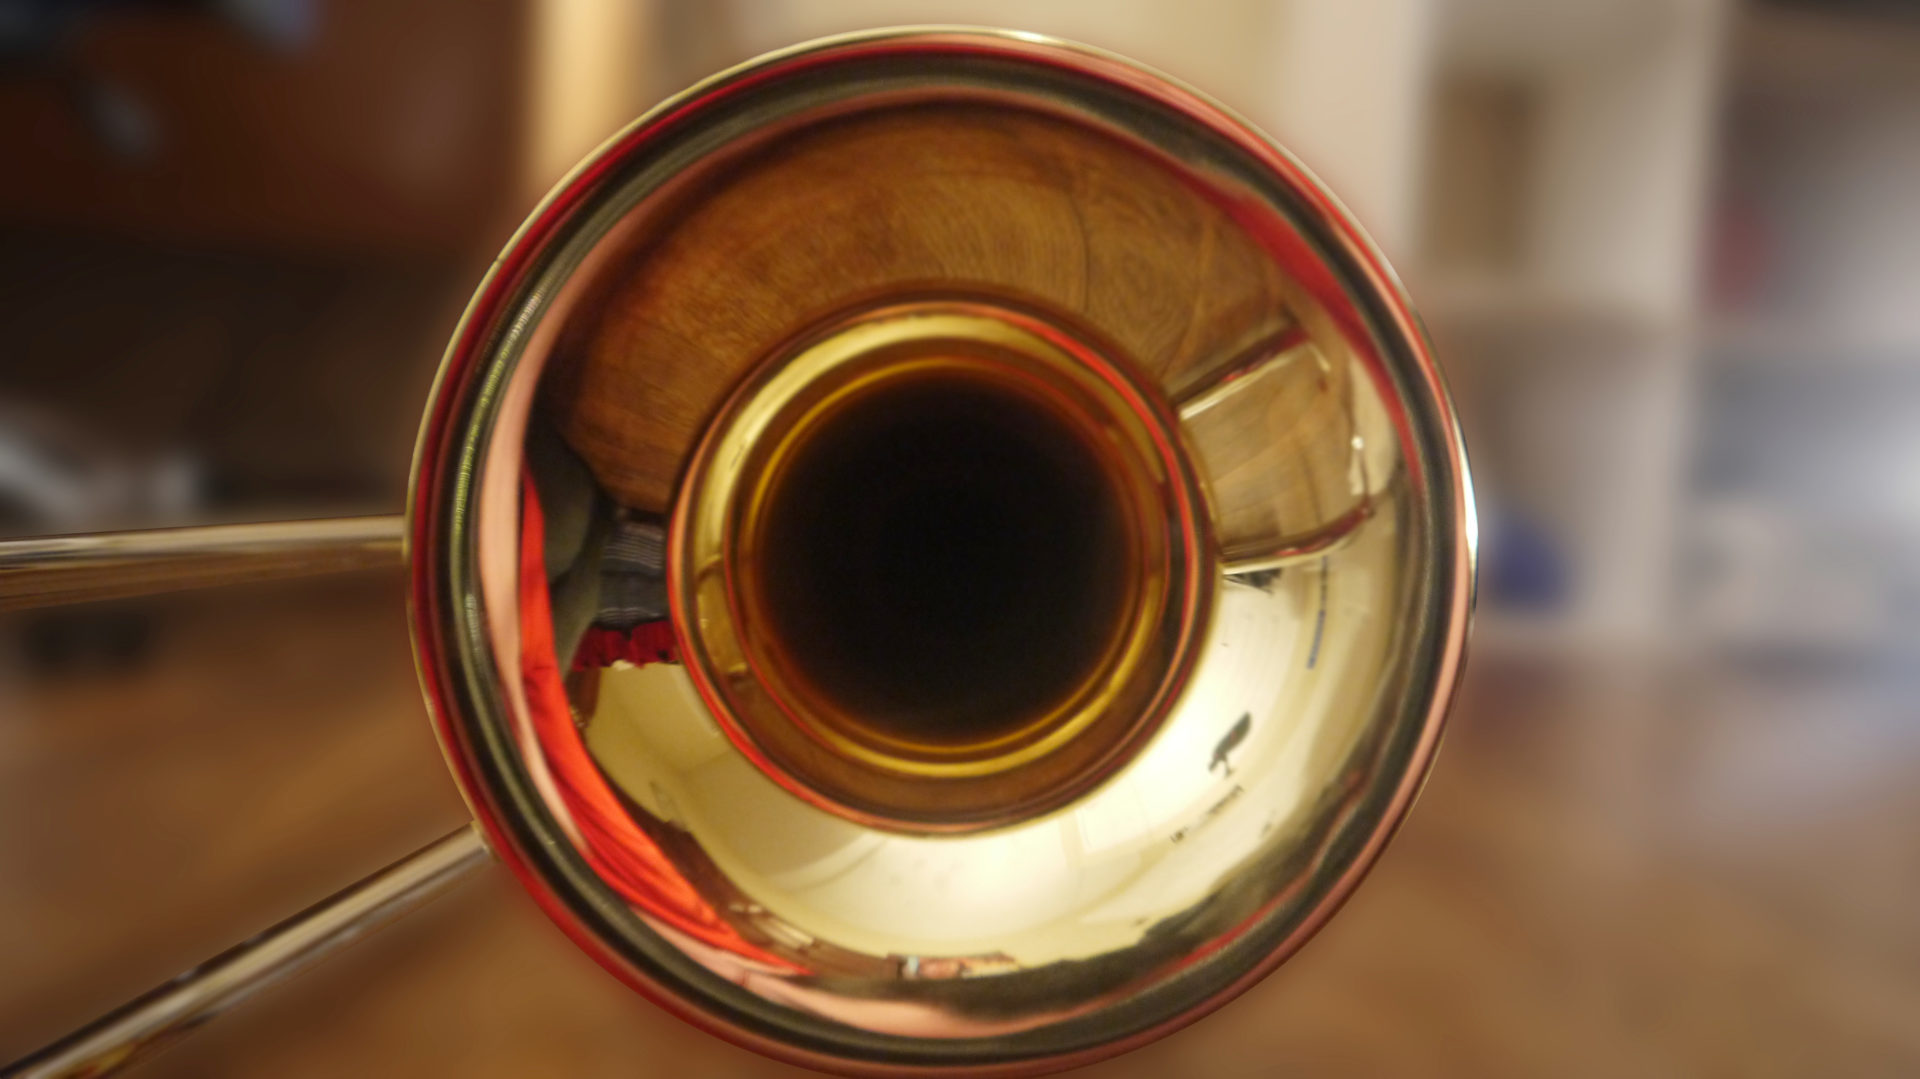 The bell of a trombone gleams in the light. Creative Commons courtesy photo